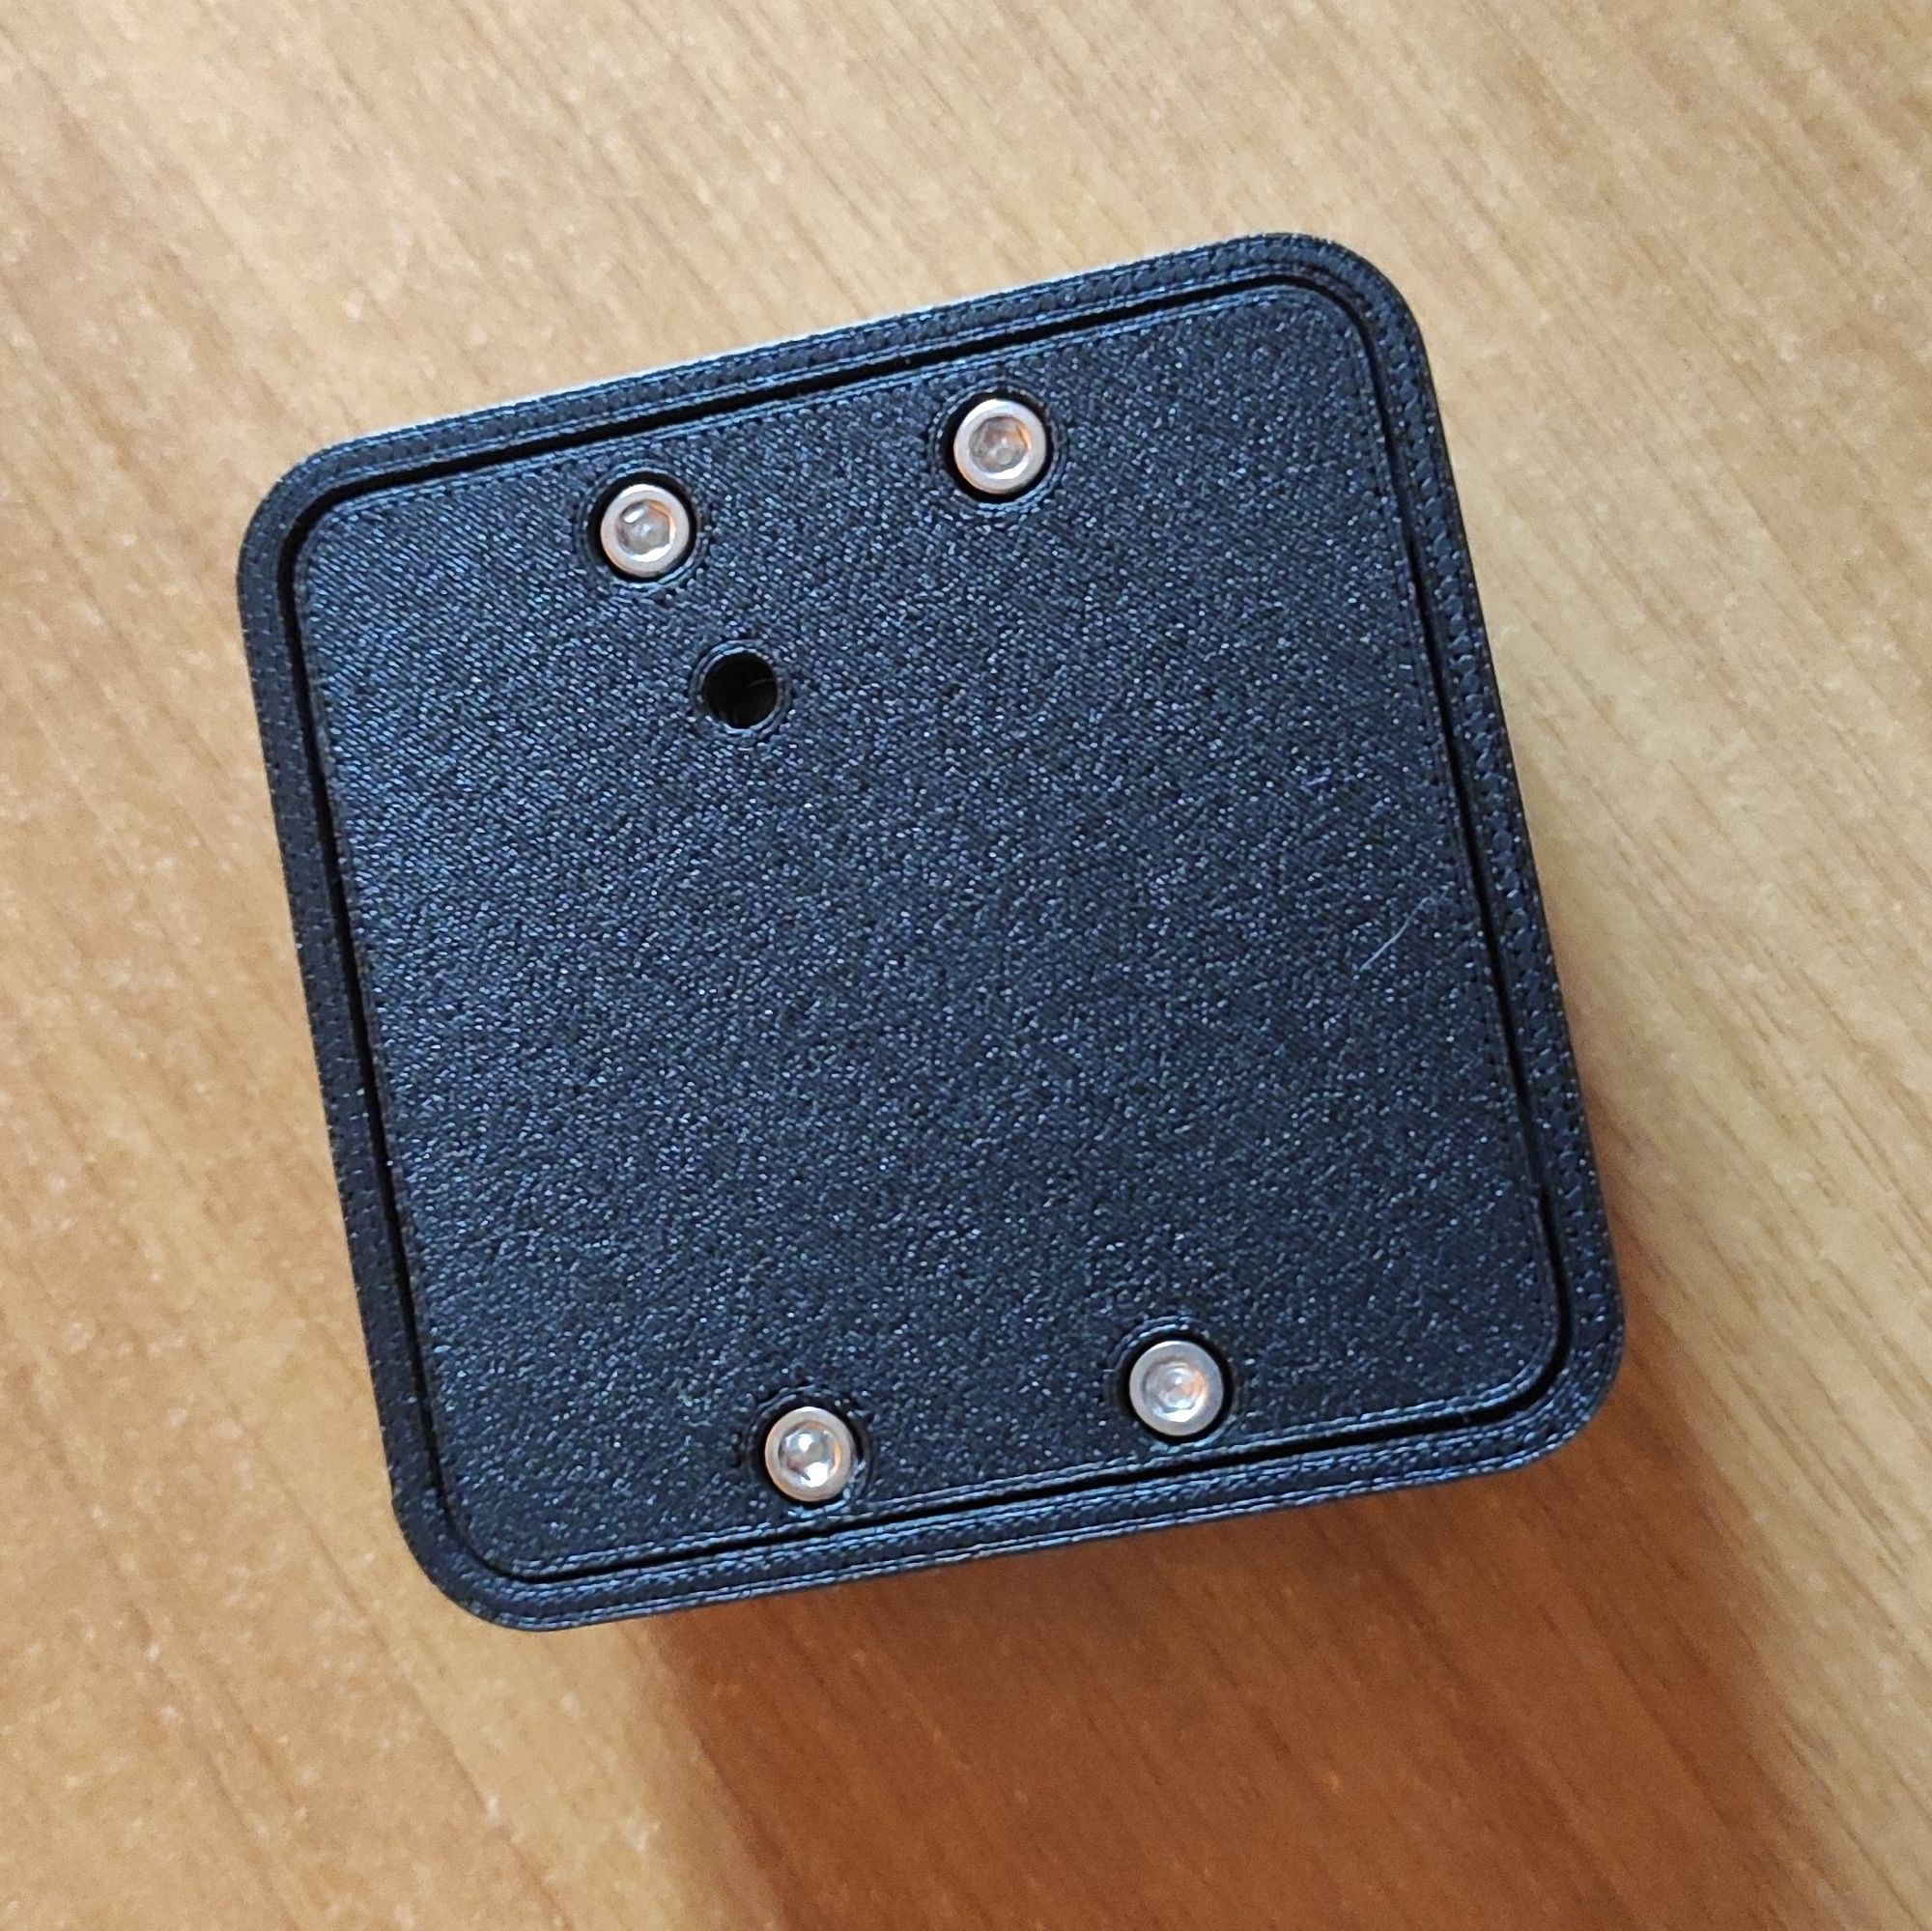 Making a macro pad from scratch